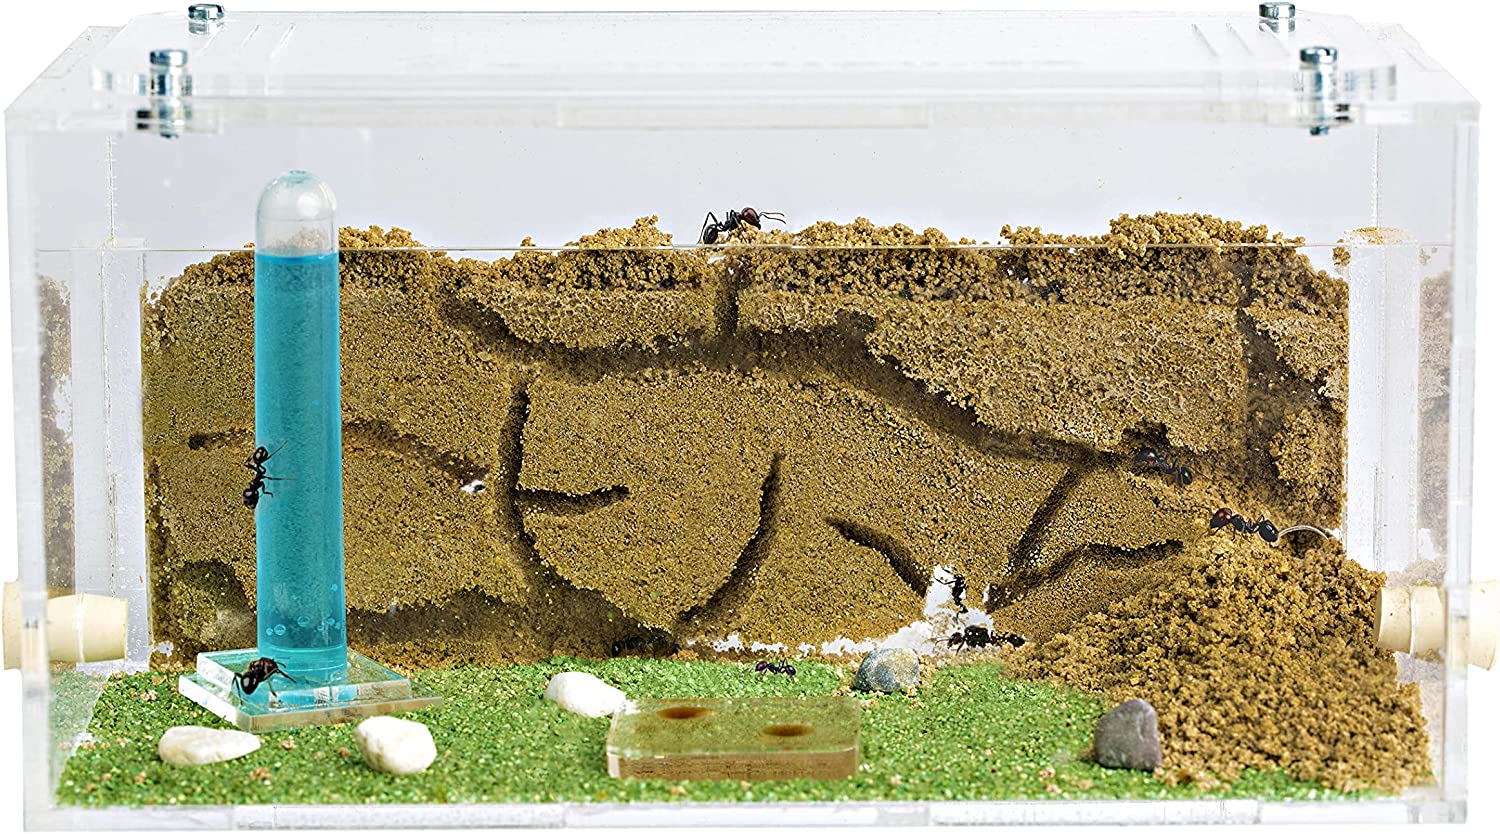 AntHouse Professional Eco-Friendly Ant Farm